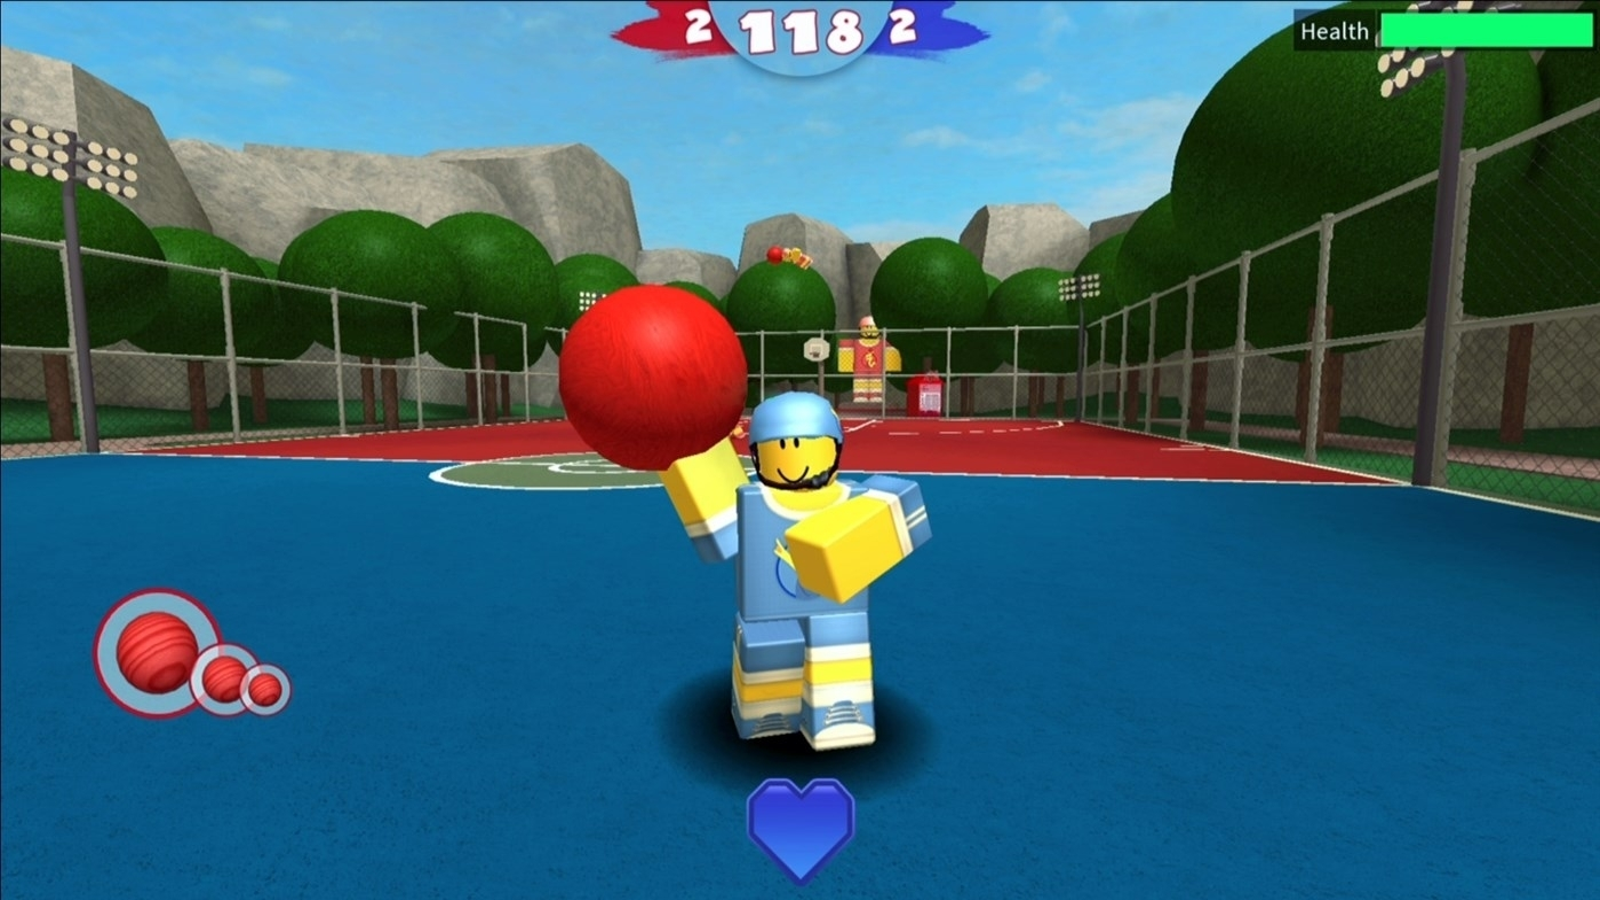 Roblox surpasses Minecraft with 100 million monthly players - The